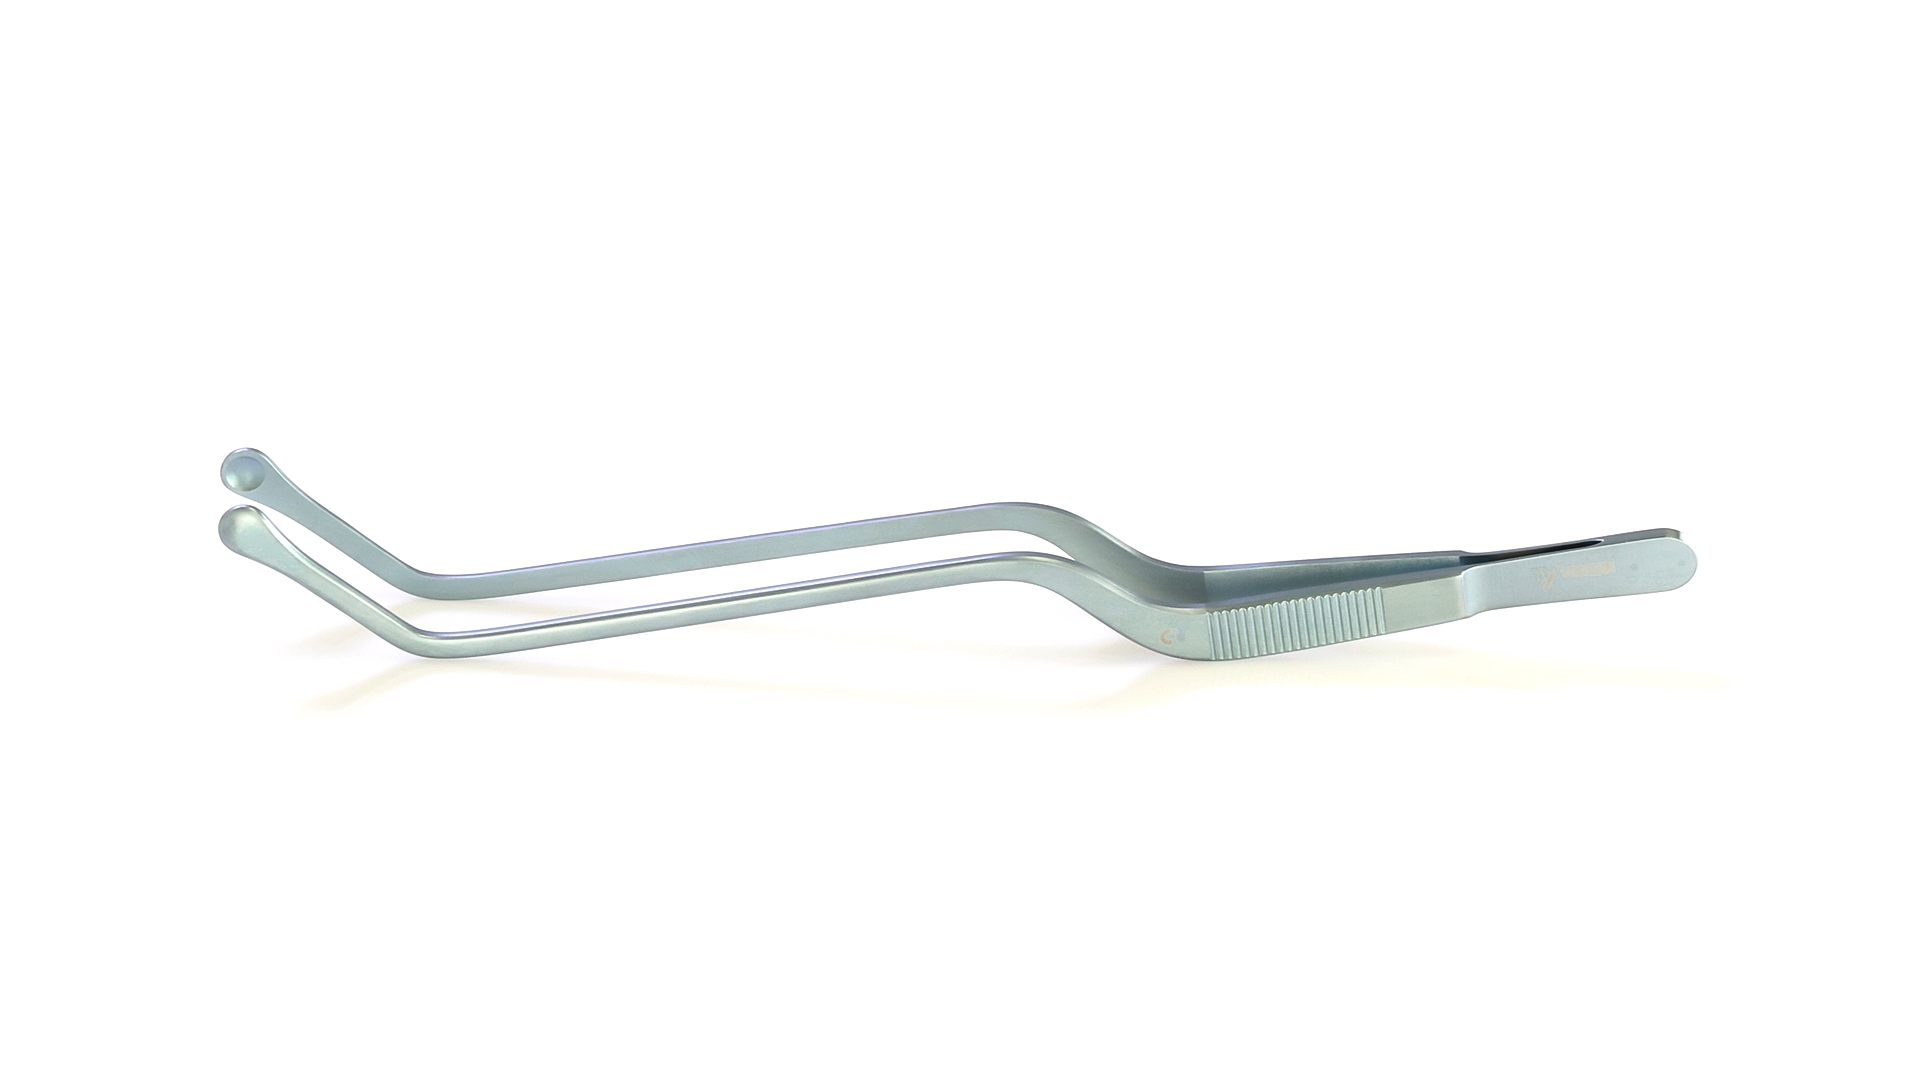 Adson Hypophyseal Forceps - Curved Up 6mm cup tips